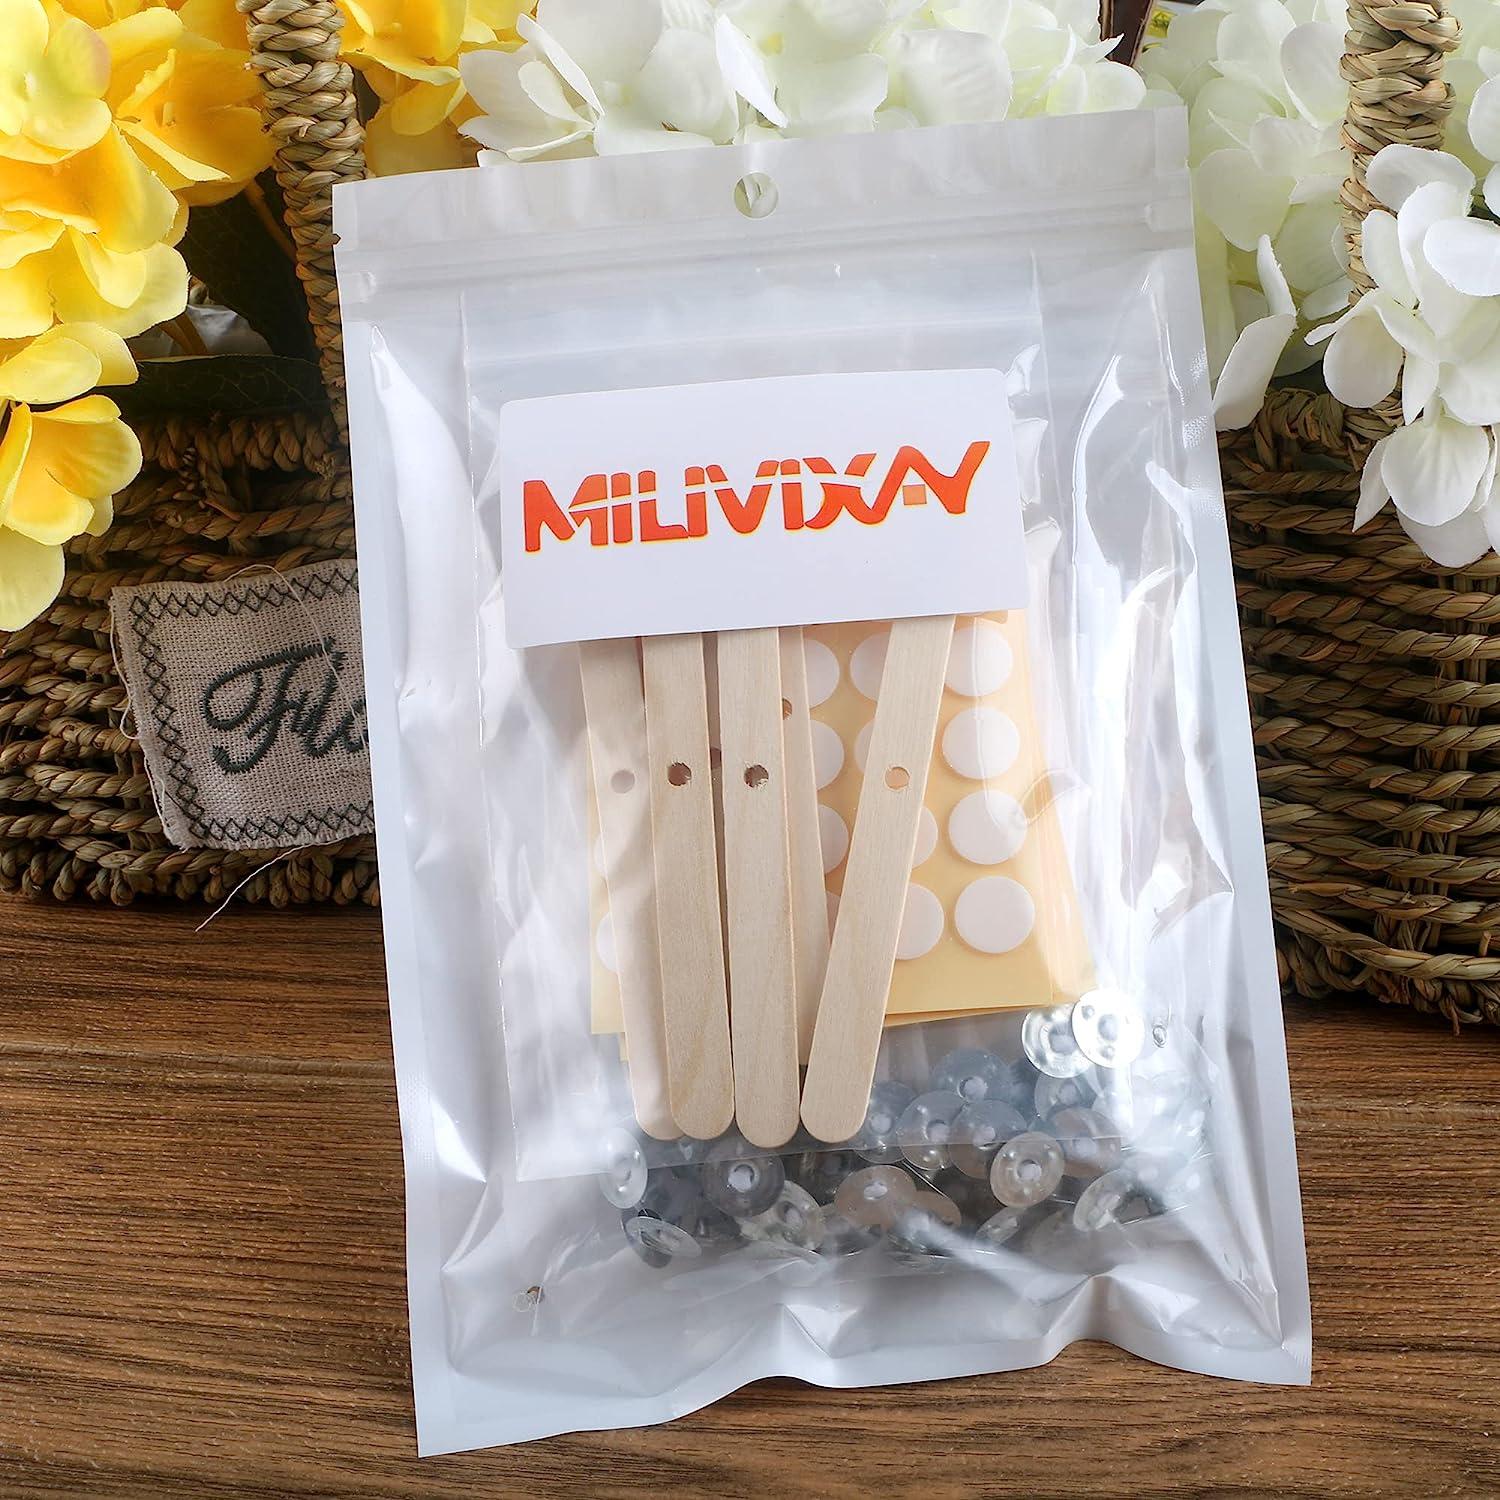 MILIVIXAY 606 Pieces Candle Making Supplies,300 Pieces Cotton Wicks, 300 Pieces Candle Wick Stickers and 6pcs Wooden Candle Wick